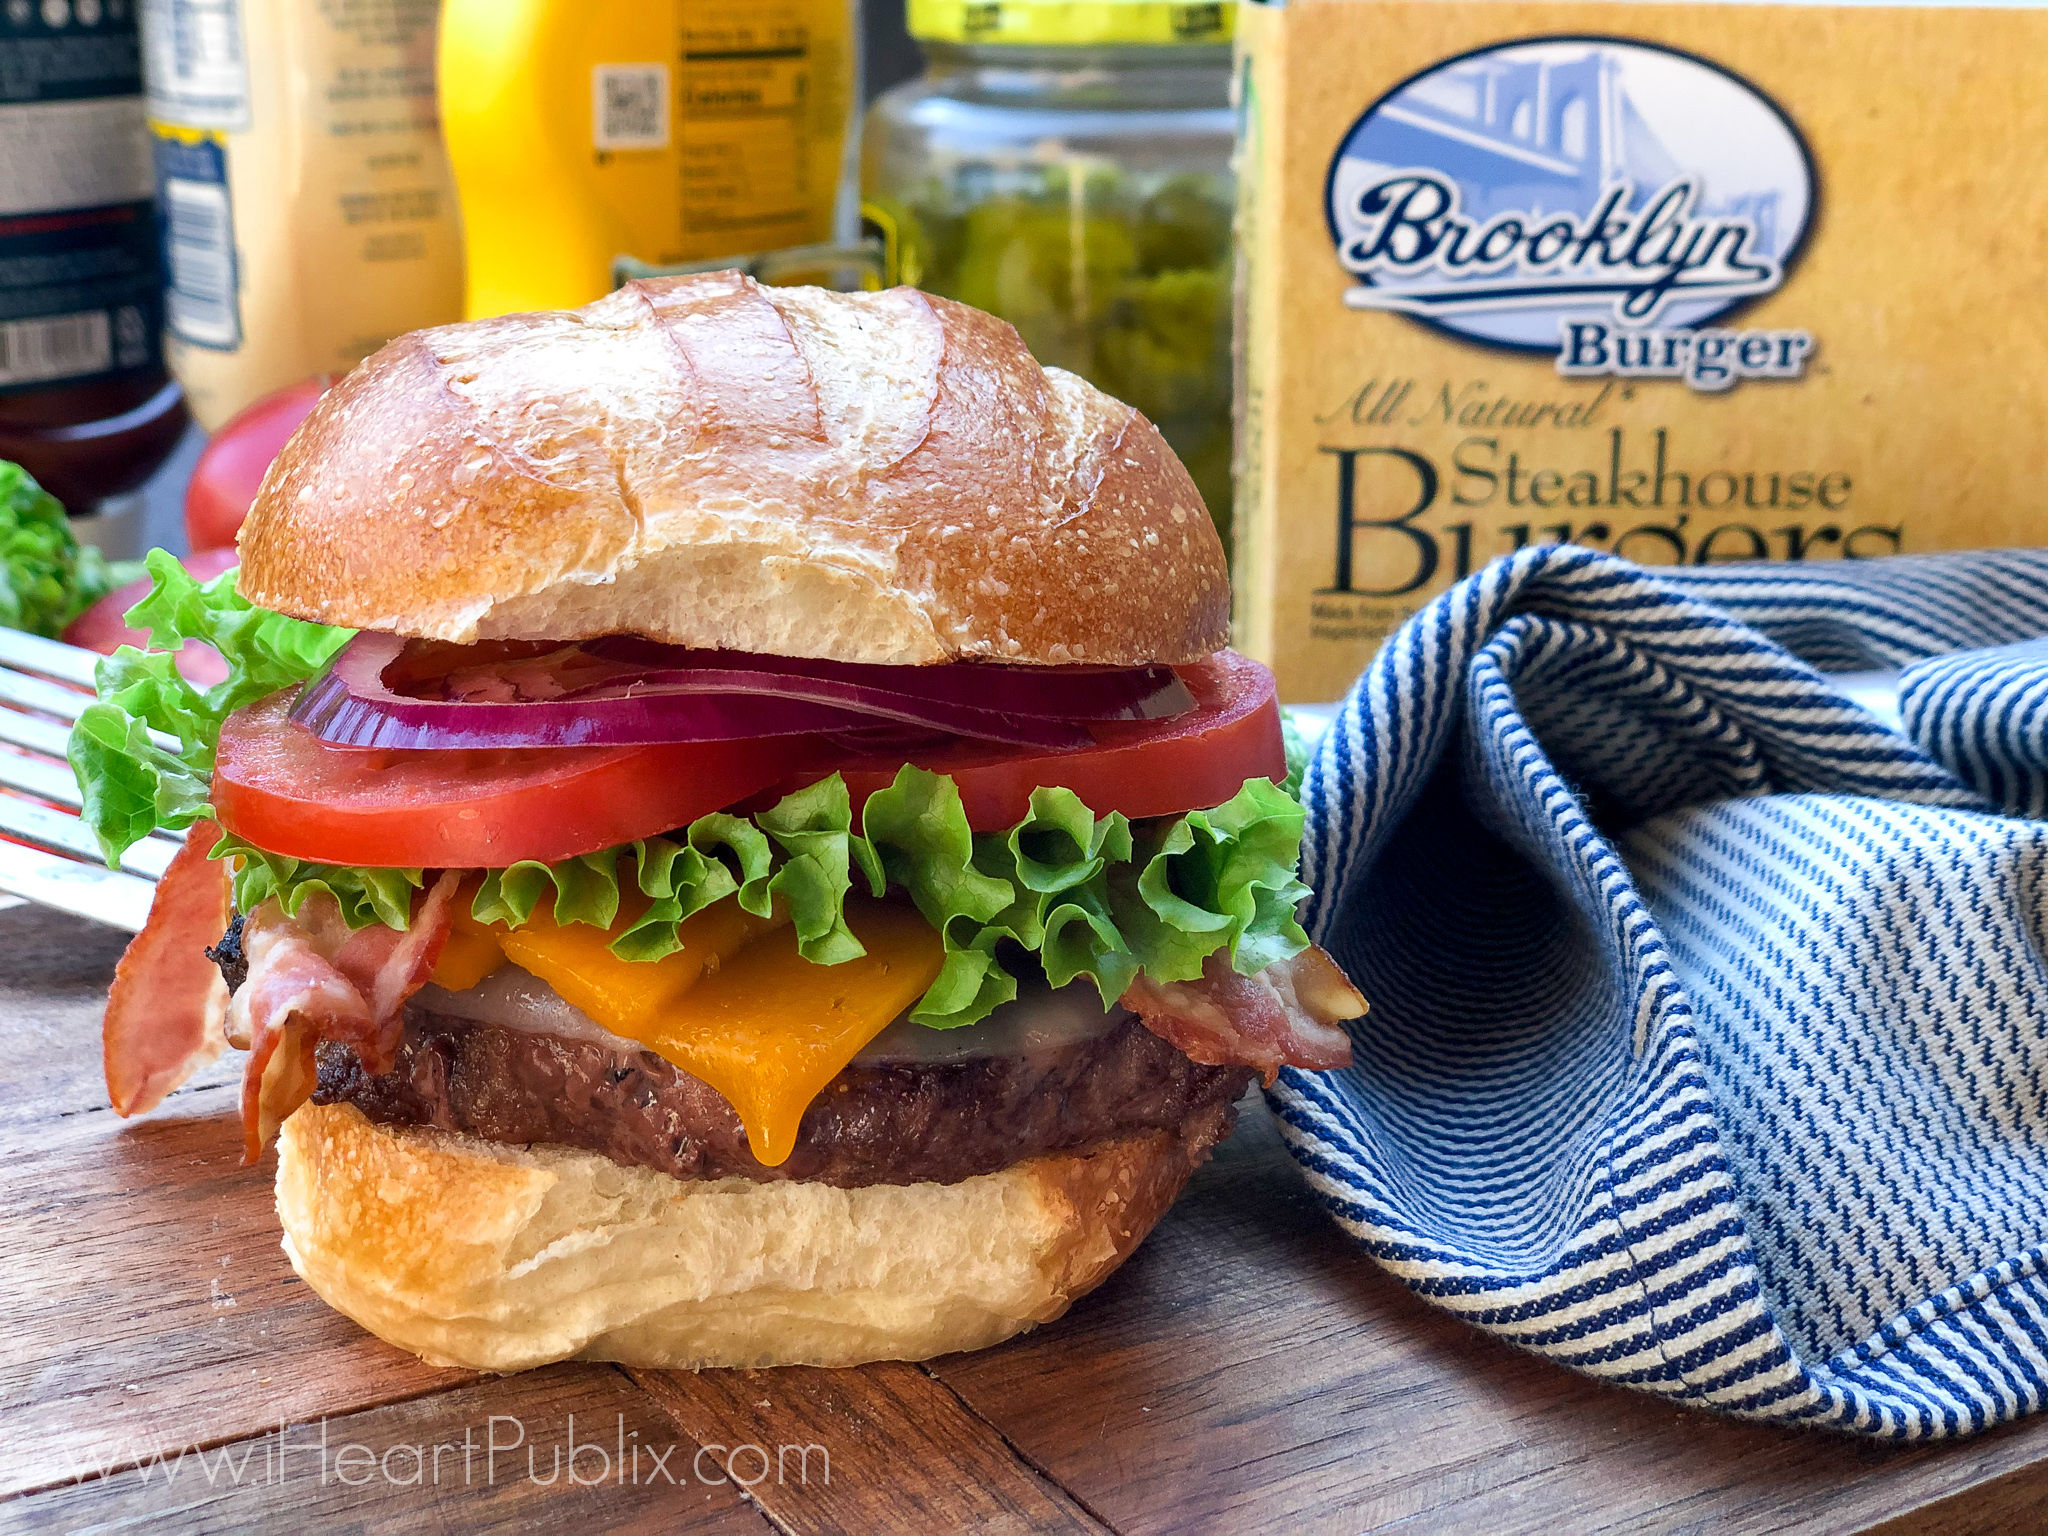 Fantastic Deal On Brooklyn Burger Steakhouse Burgers This Week At Publix - Stock Your Freezer For The Busy Holiday Season! on I Heart Publix